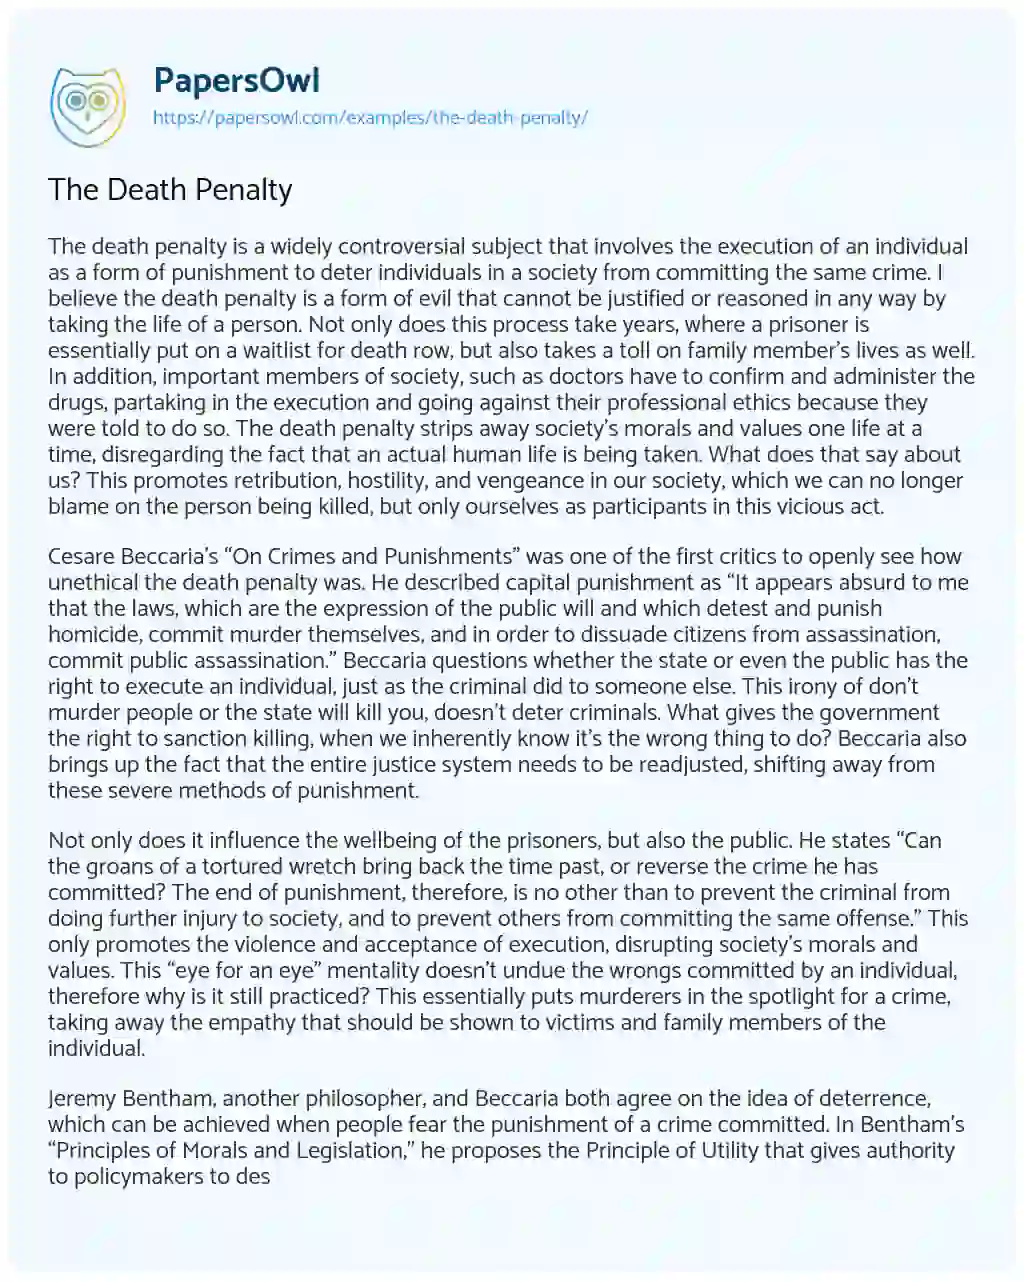 Essay on The Death Penalty